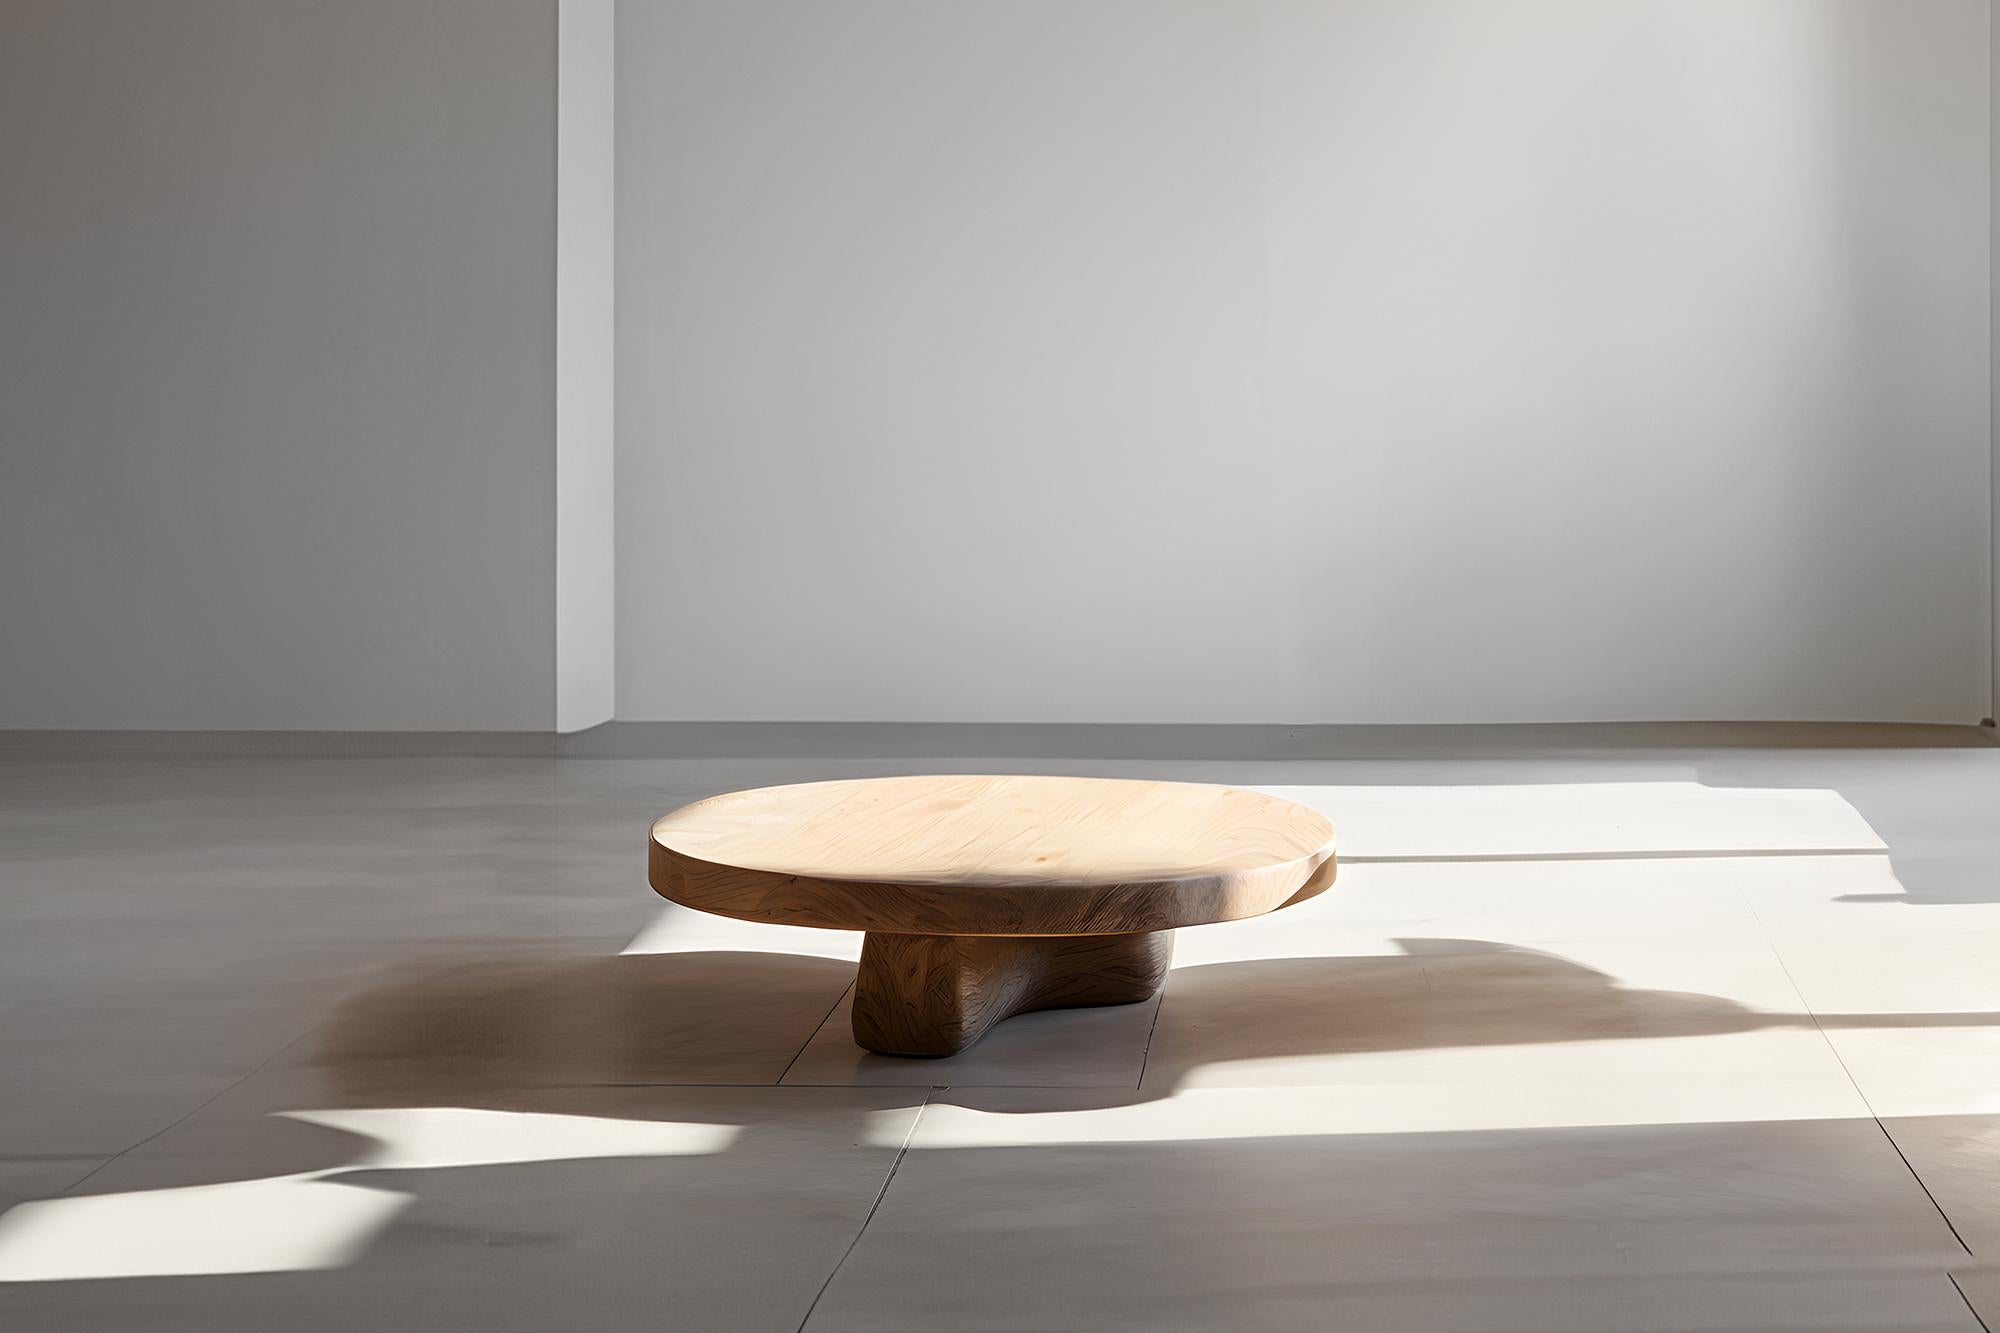 Minimalist Round Coffee Table - Natural Oak Fundamenta 43 by NONO


Sculptural coffee table made of solid wood with a natural water-based or black tinted finish. Due to the nature of the production process, each piece may vary in grain, texture,